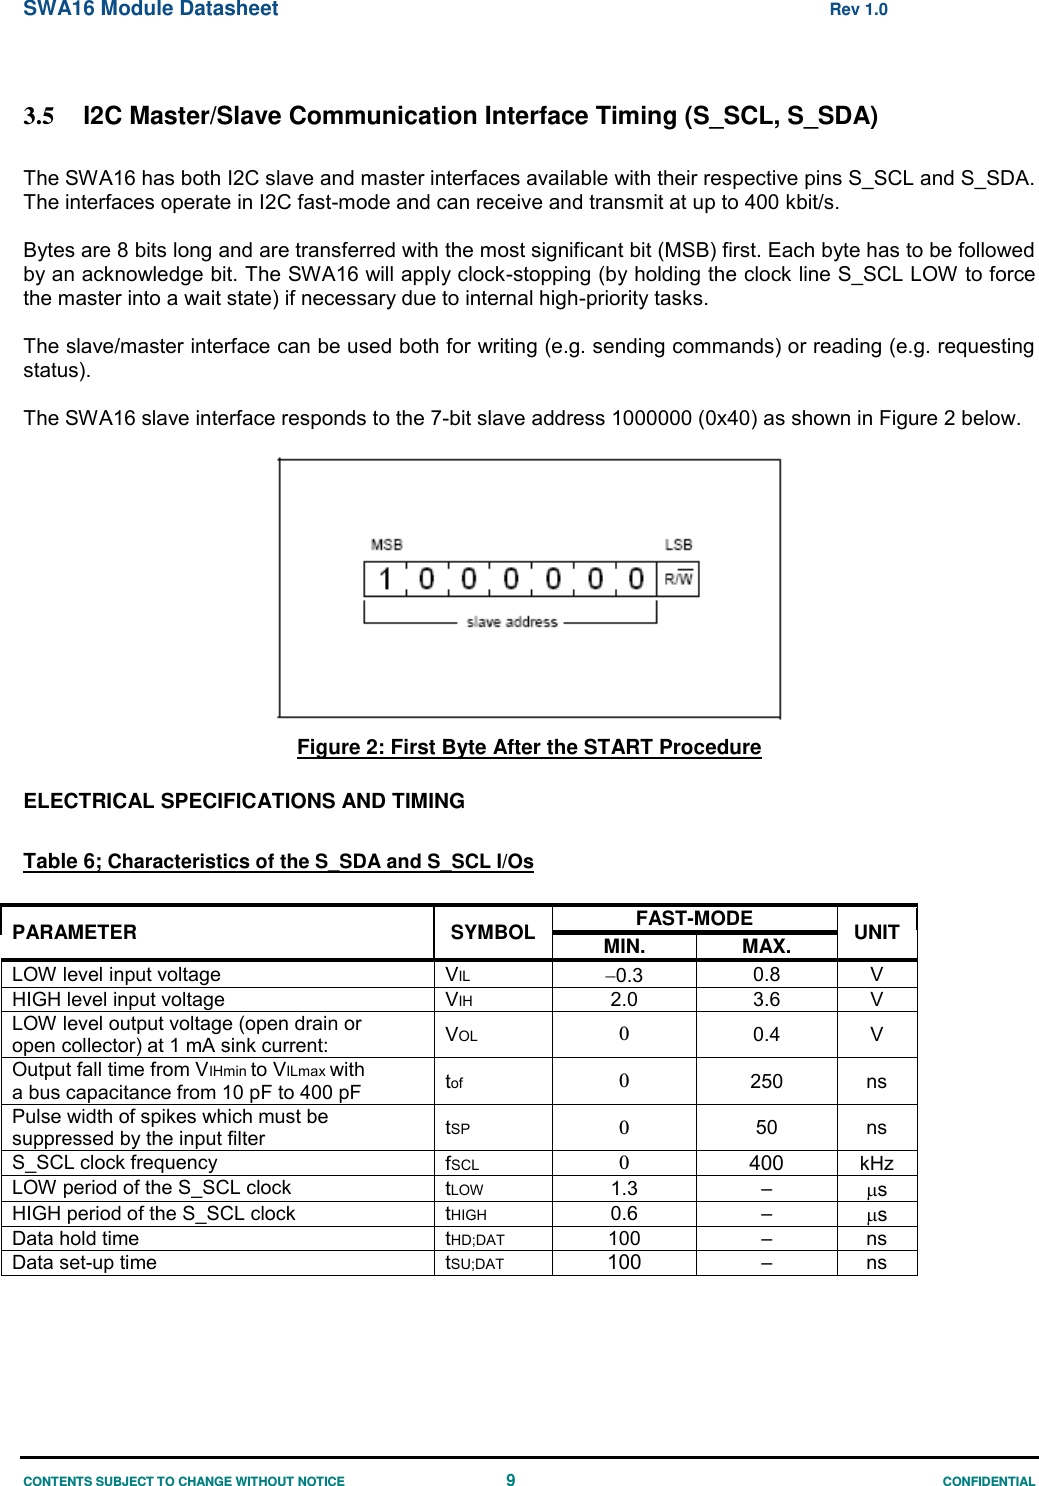 SWA16 Module Datasheet  Rev 1.0 CONTENTS SUBJECT TO CHANGE WITHOUT NOTICE  9 CONFIDENTIAL  3.5  I2C Master/Slave Communication Interface Timing (S_SCL, S_SDA)  The SWA16 has both I2C slave and master interfaces available with their respective pins S_SCL and S_SDA. The interfaces operate in I2C fast-mode and can receive and transmit at up to 400 kbit/s.  Bytes are 8 bits long and are transferred with the most significant bit (MSB) first. Each byte has to be followed by an acknowledge bit. The SWA16 will apply clock-stopping (by holding the clock line S_SCL LOW to force the master into a wait state) if necessary due to internal high-priority tasks.  The slave/master interface can be used both for writing (e.g. sending commands) or reading (e.g. requesting status).  The SWA16 slave interface responds to the 7-bit slave address 1000000 (0x40) as shown in Figure 2 below.   Figure 2: First Byte After the START Procedure  ELECTRICAL SPECIFICATIONS AND TIMING  Table 6; Characteristics of the S_SDA and S_SCL I/Os  PARAMETER SYMBOL FAST-MODE UNIT MIN. MAX. LOW level input voltage VIL 0.3 0.8 V HIGH level input voltage VIH 2.0 3.6 V LOW level output voltage (open drain or open collector) at 1 mA sink current: VOL 0 0.4 V Output fall time from VIHmin to VILmax with a bus capacitance from 10 pF to 400 pF tof 0 250 ns Pulse width of spikes which must be suppressed by the input filter tSP 0 50 ns S_SCL clock frequency  fSCL 0 400 kHz LOW period of the S_SCL clock tLOW 1.3 – s HIGH period of the S_SCL clock tHIGH 0.6 – s Data hold time tHD;DAT 100 – ns Data set-up time tSU;DAT 100 – ns  